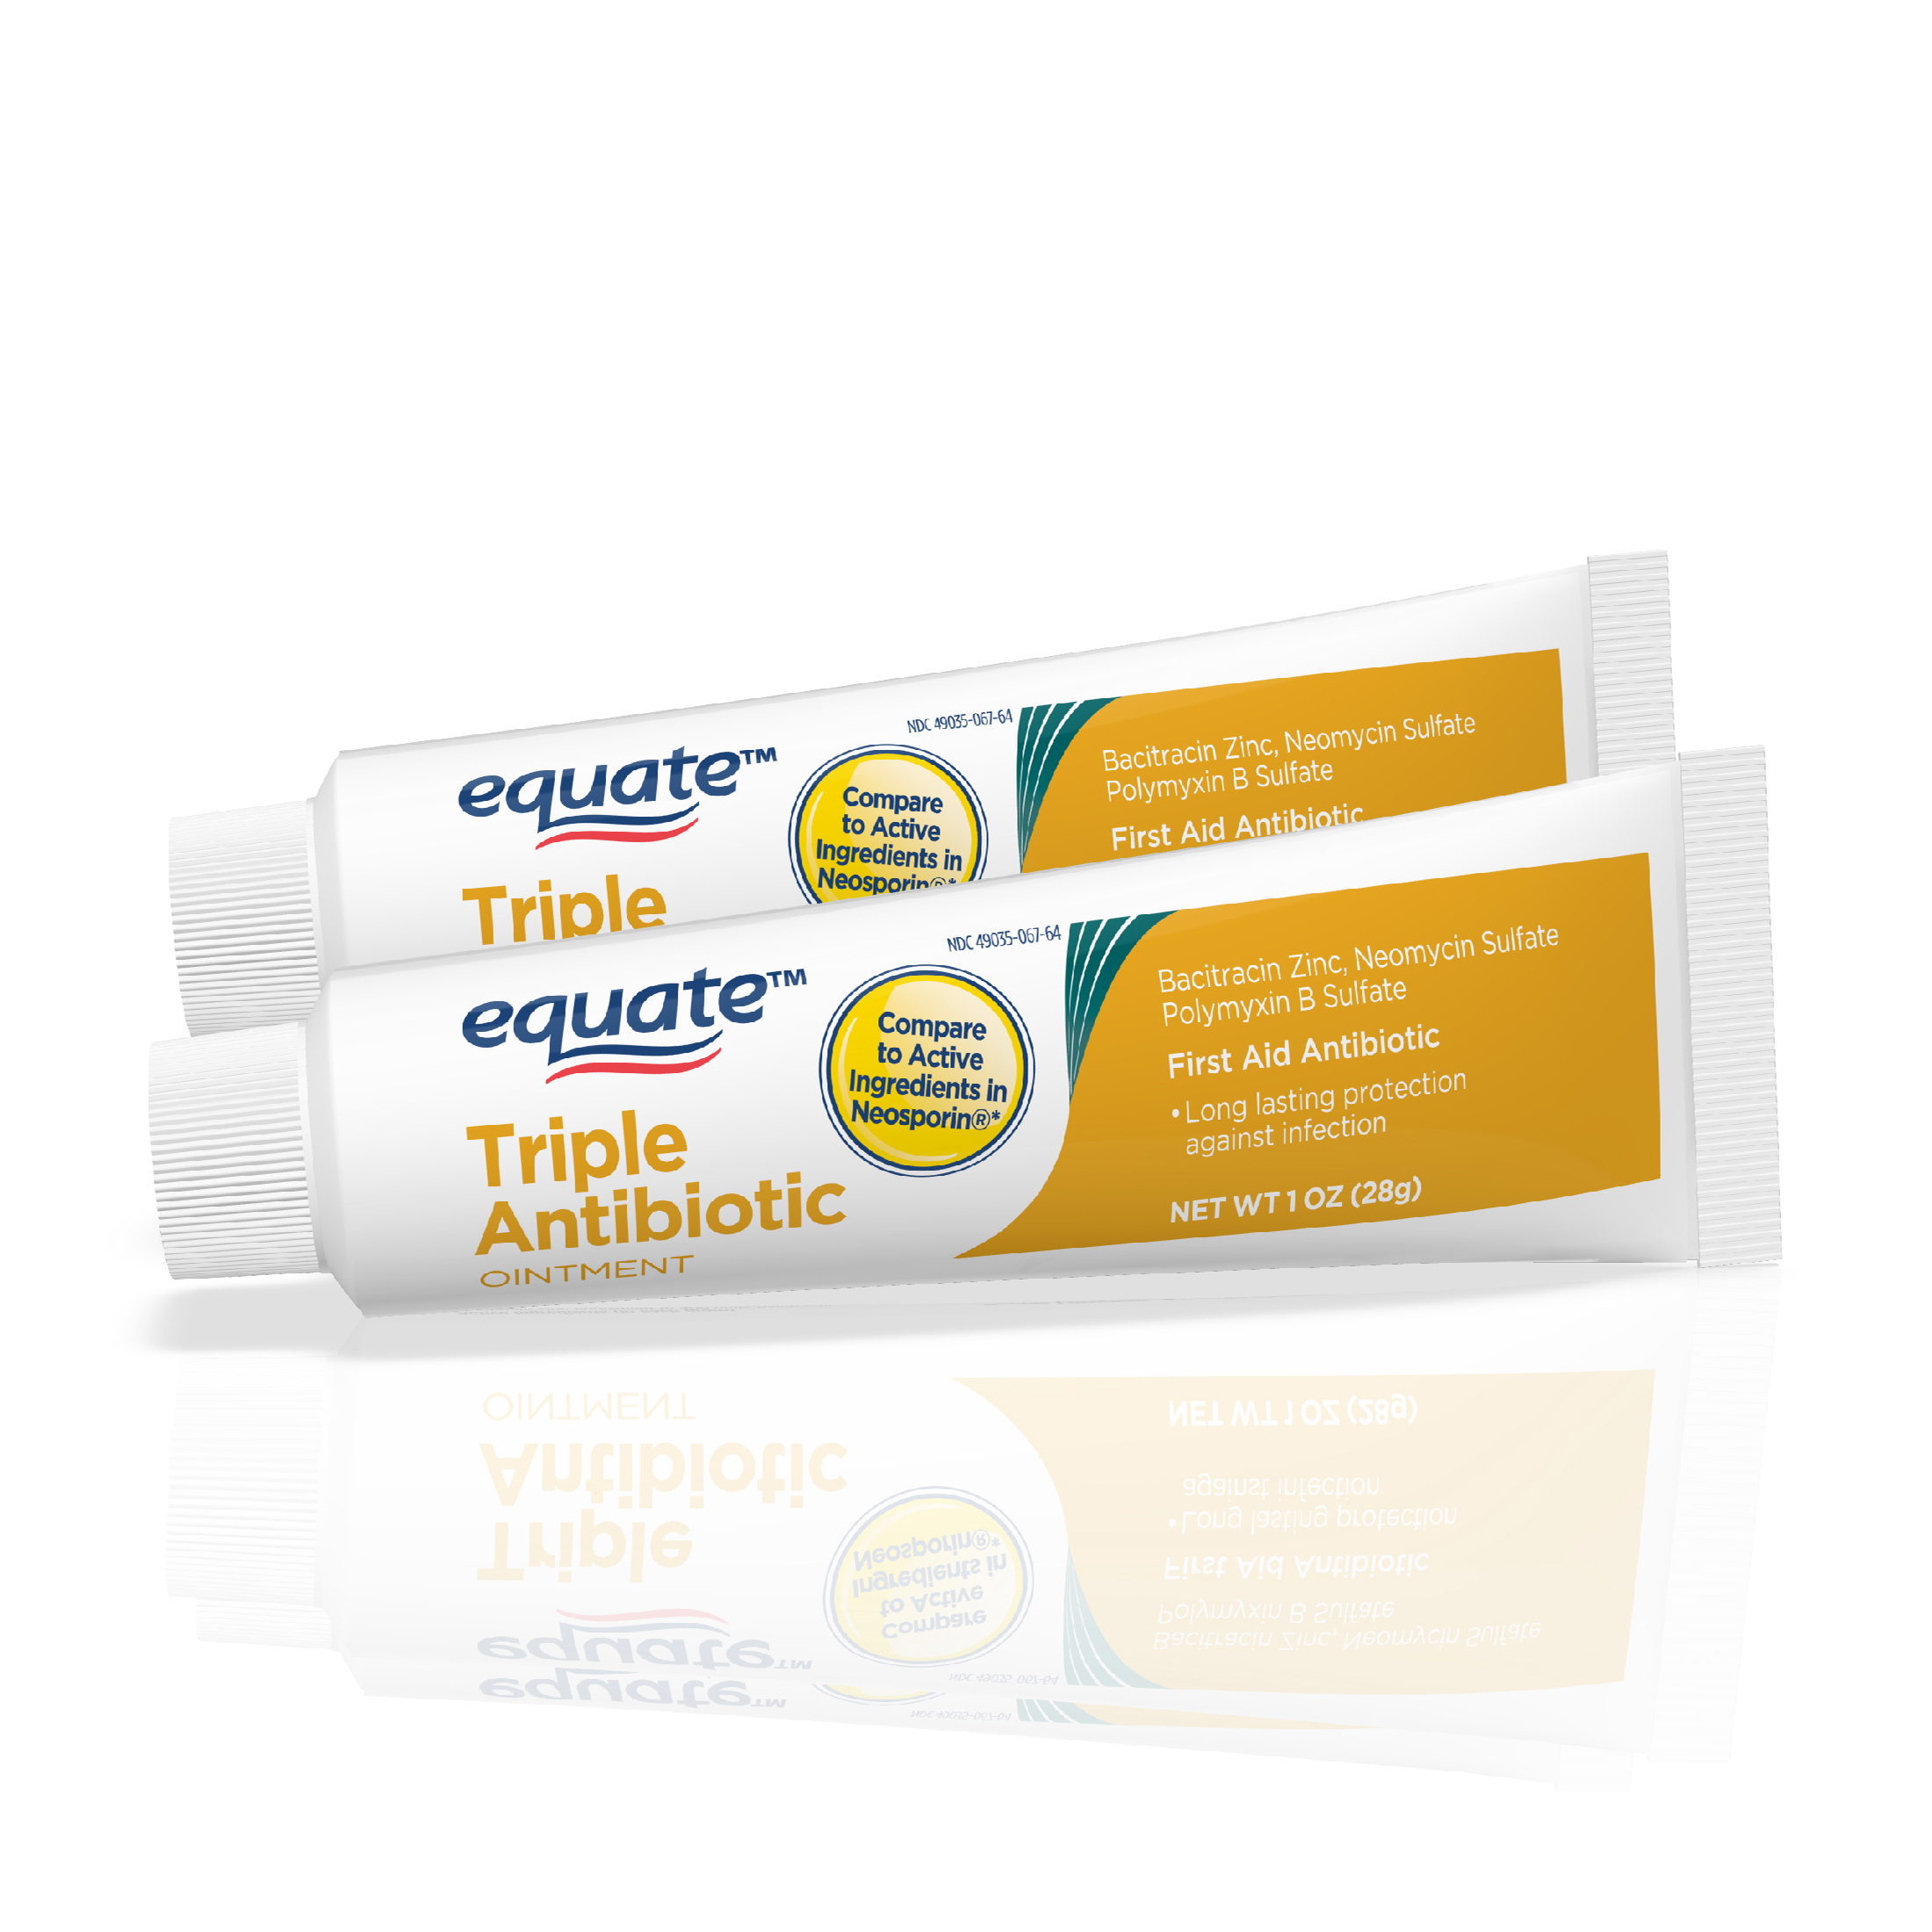 Equate First Aid Triple Antibiotic Ointment, Infection Protection, 2 oz, 2 Pack - image 5 of 7